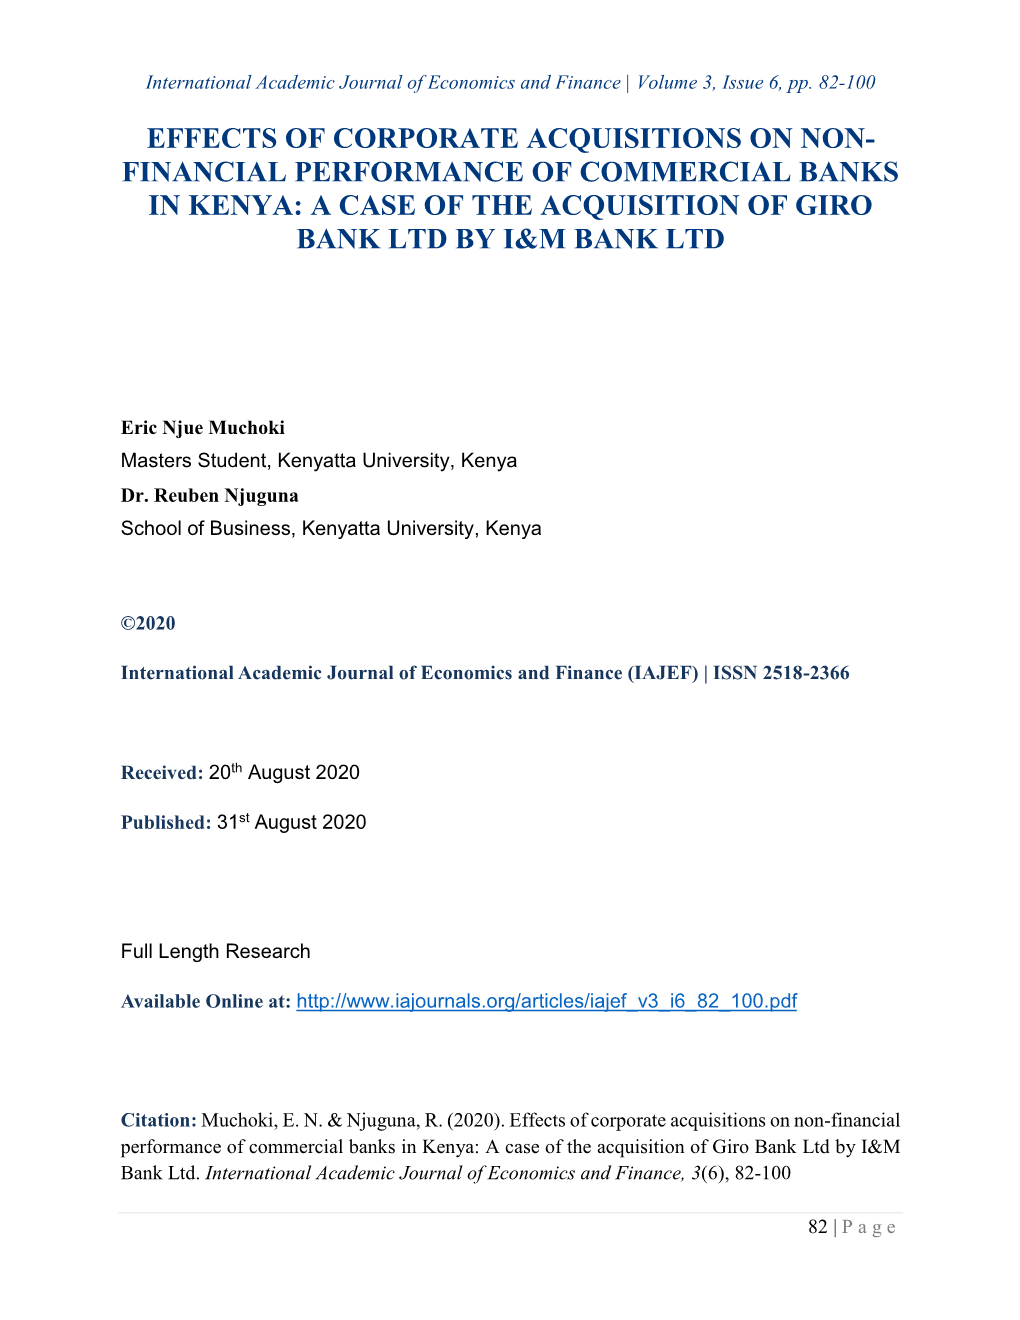 Financial Performance of Commercial Banks in Kenya: a Case of the Acquisition of Giro Bank Ltd by I&M Bank Ltd